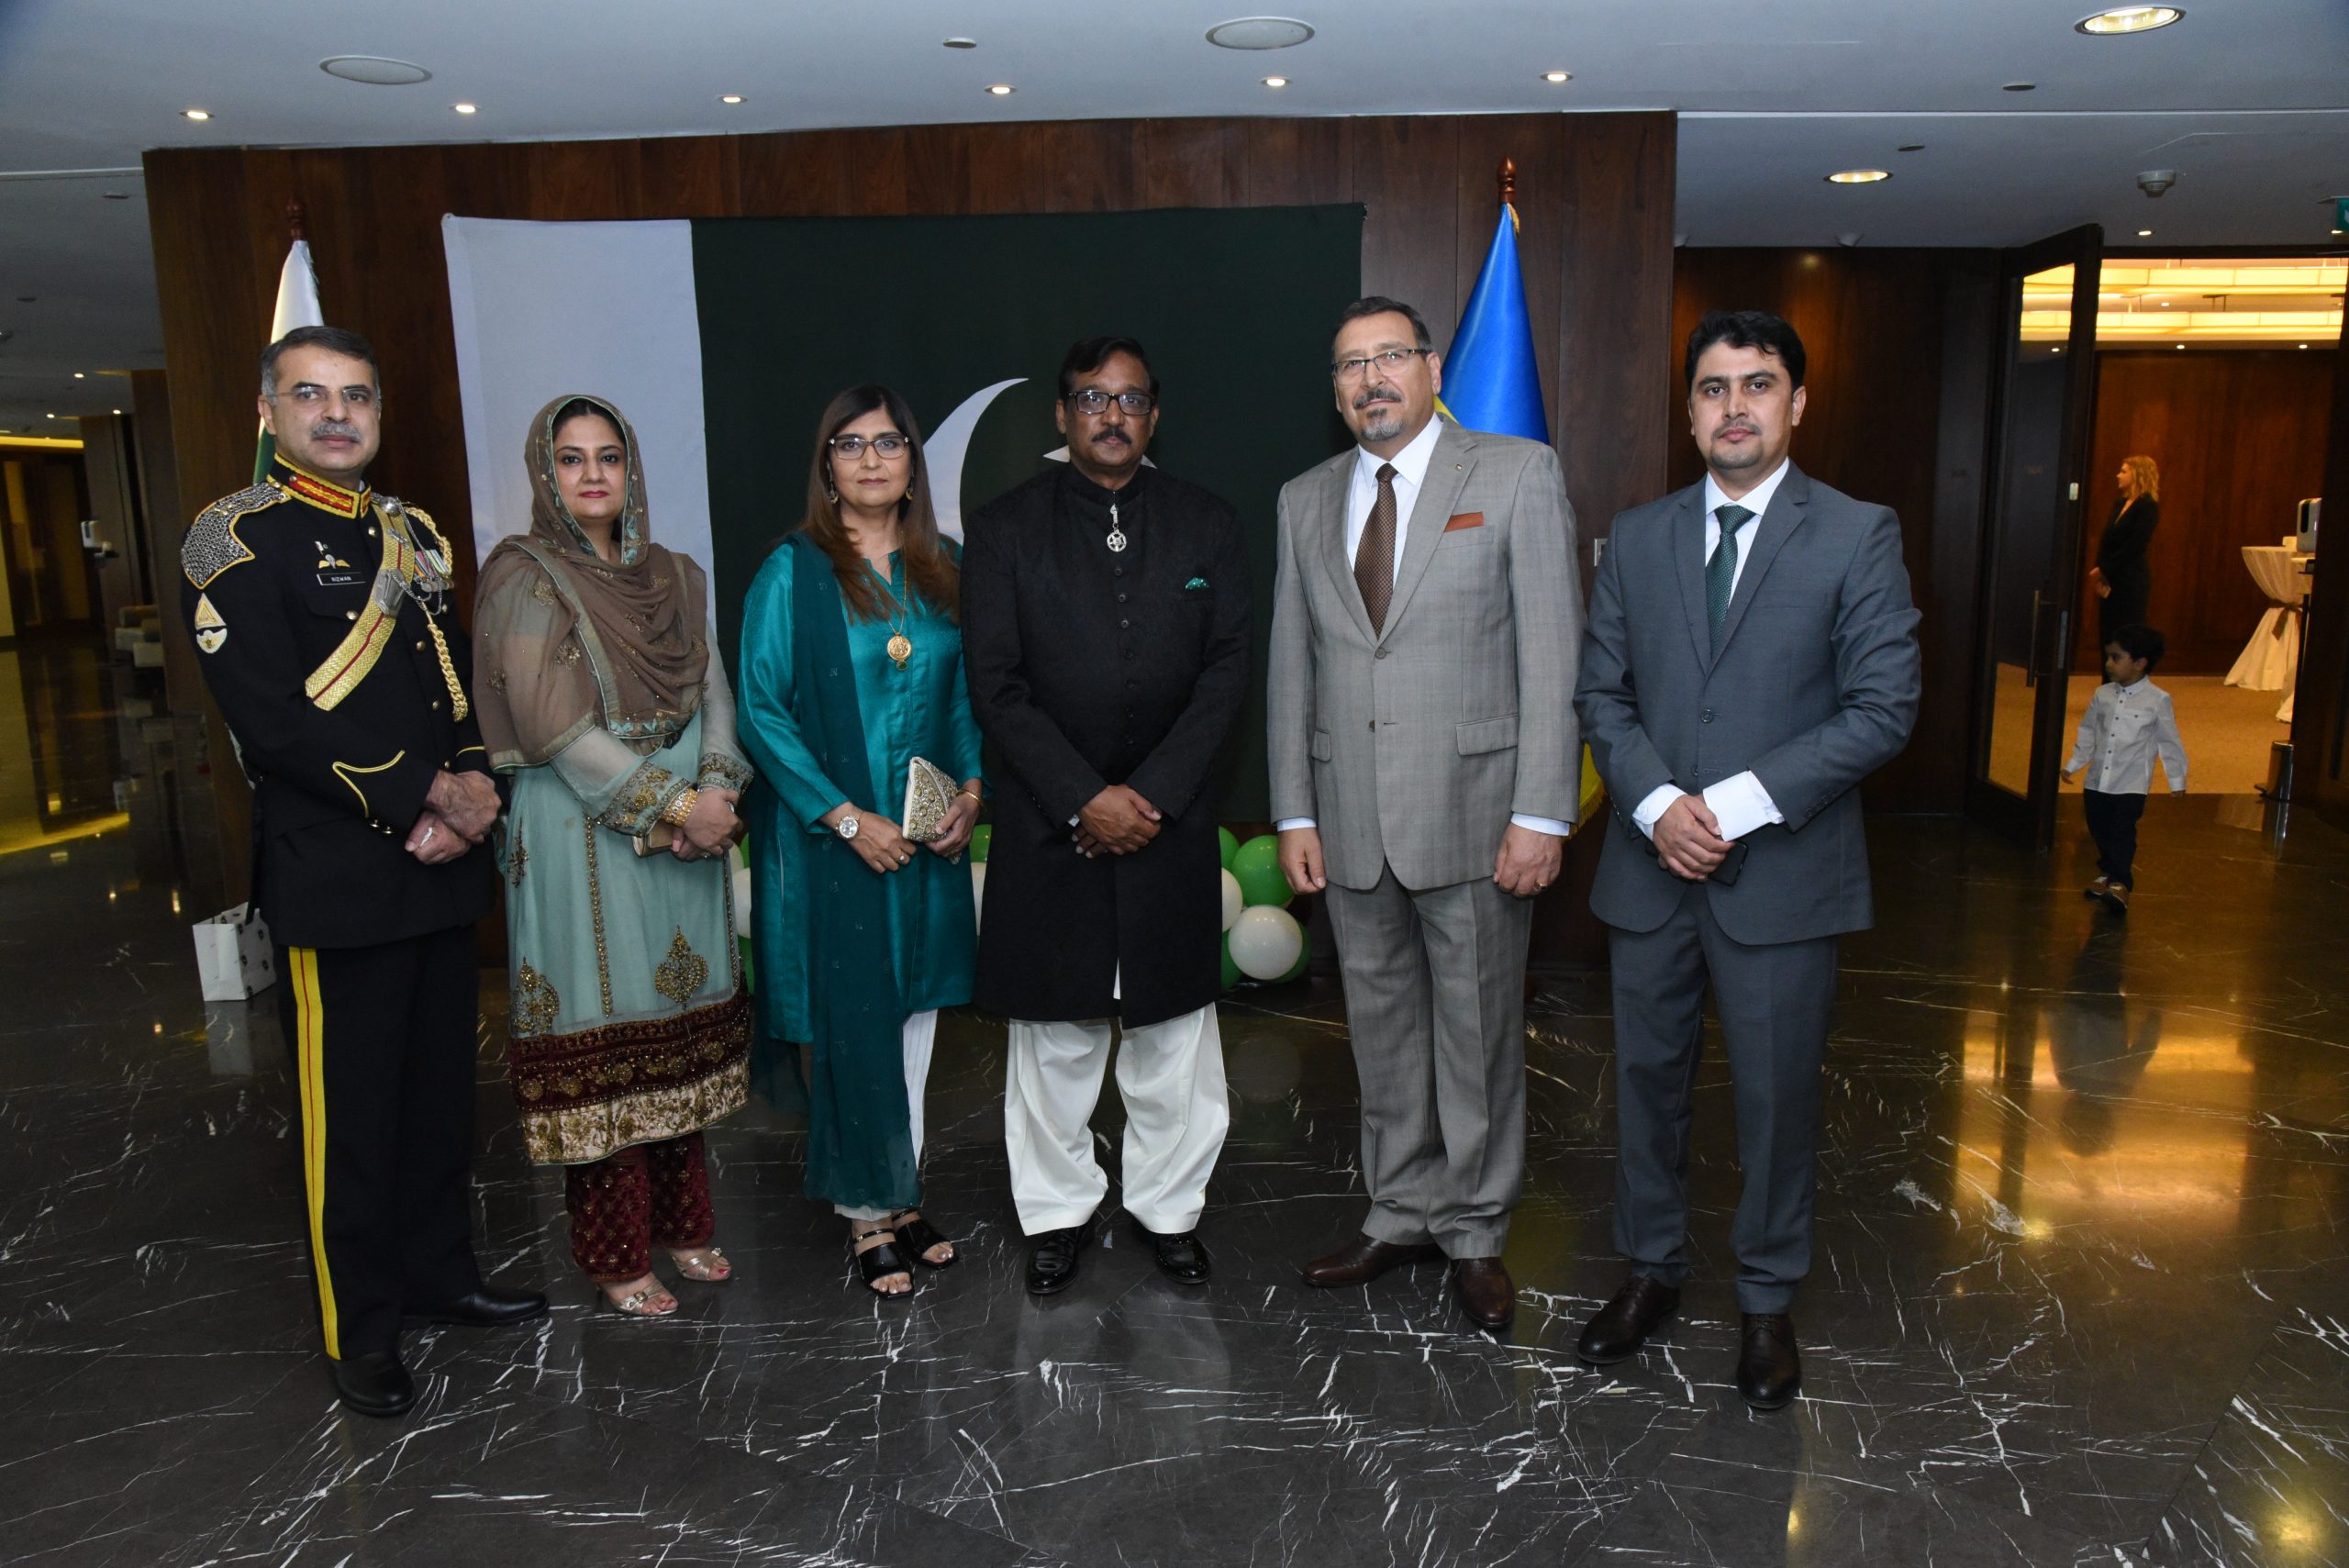 H.E. Ambassador Hashem Dajani attending the ceremony on the occasion of the National Day of Pakistan